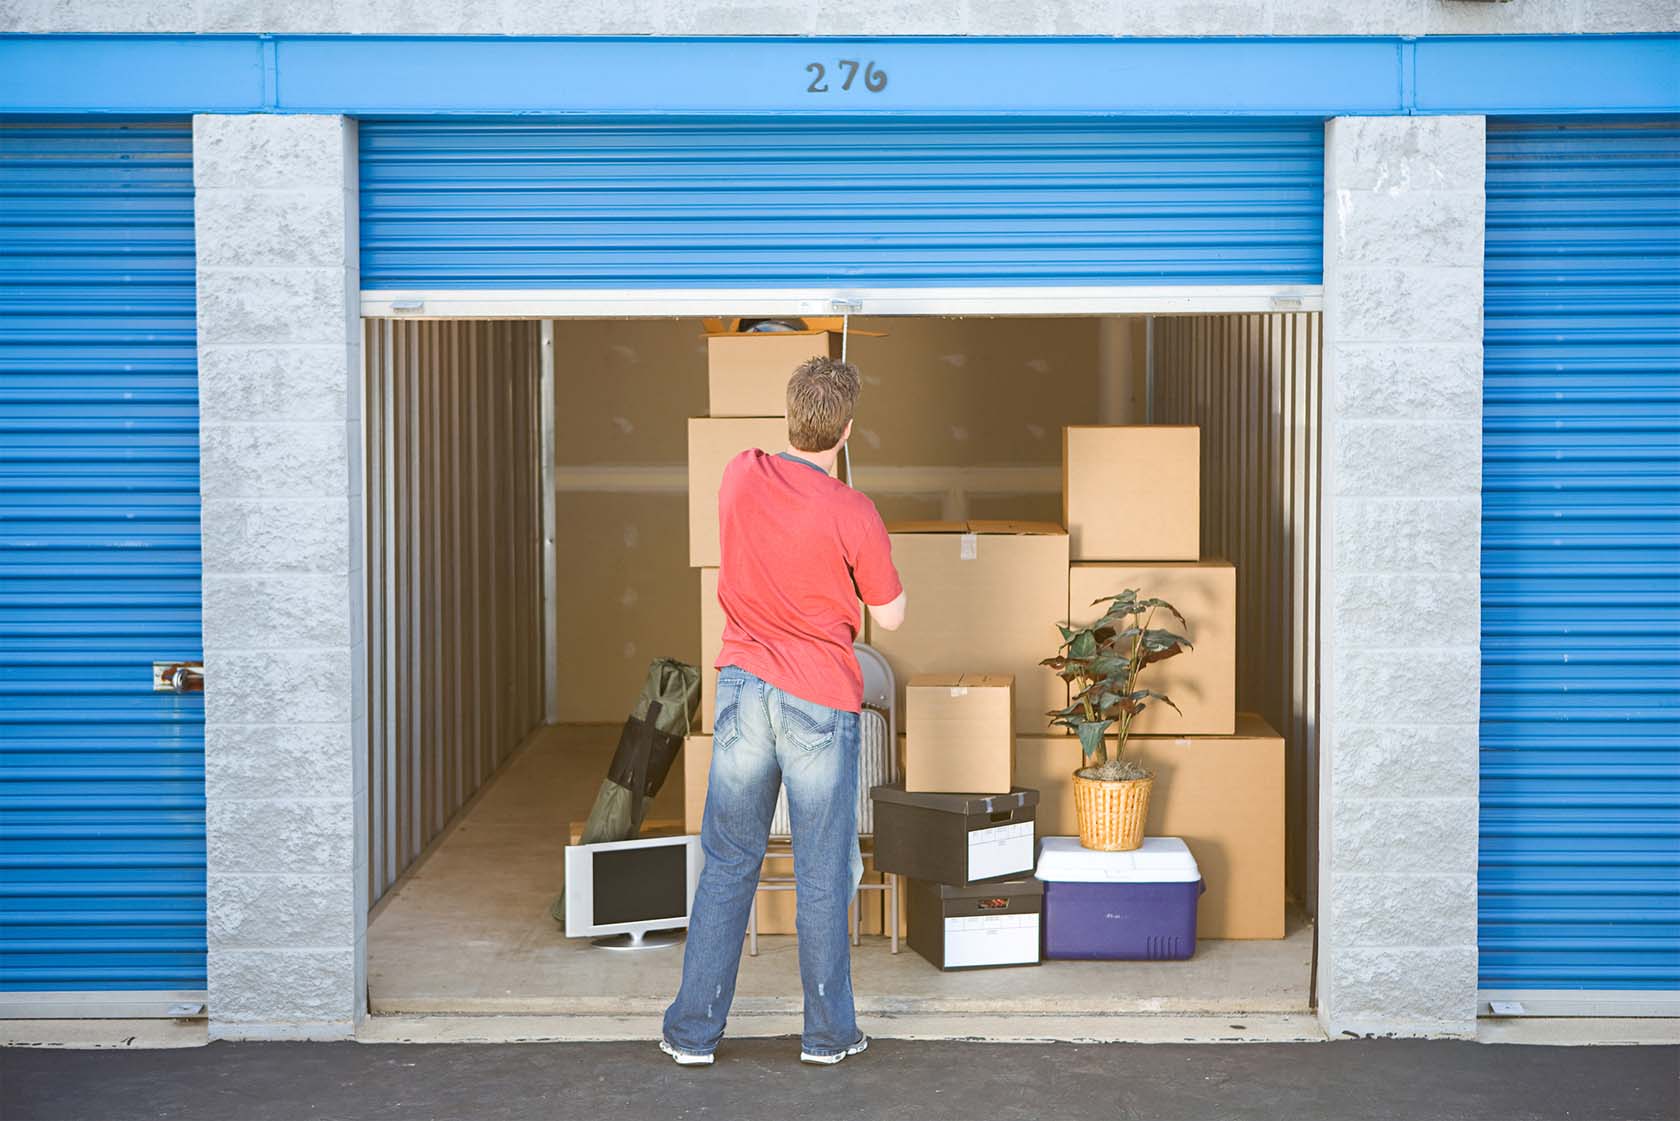 Top 5 Mistakes People Make When Choosing a Self-Storage Facility